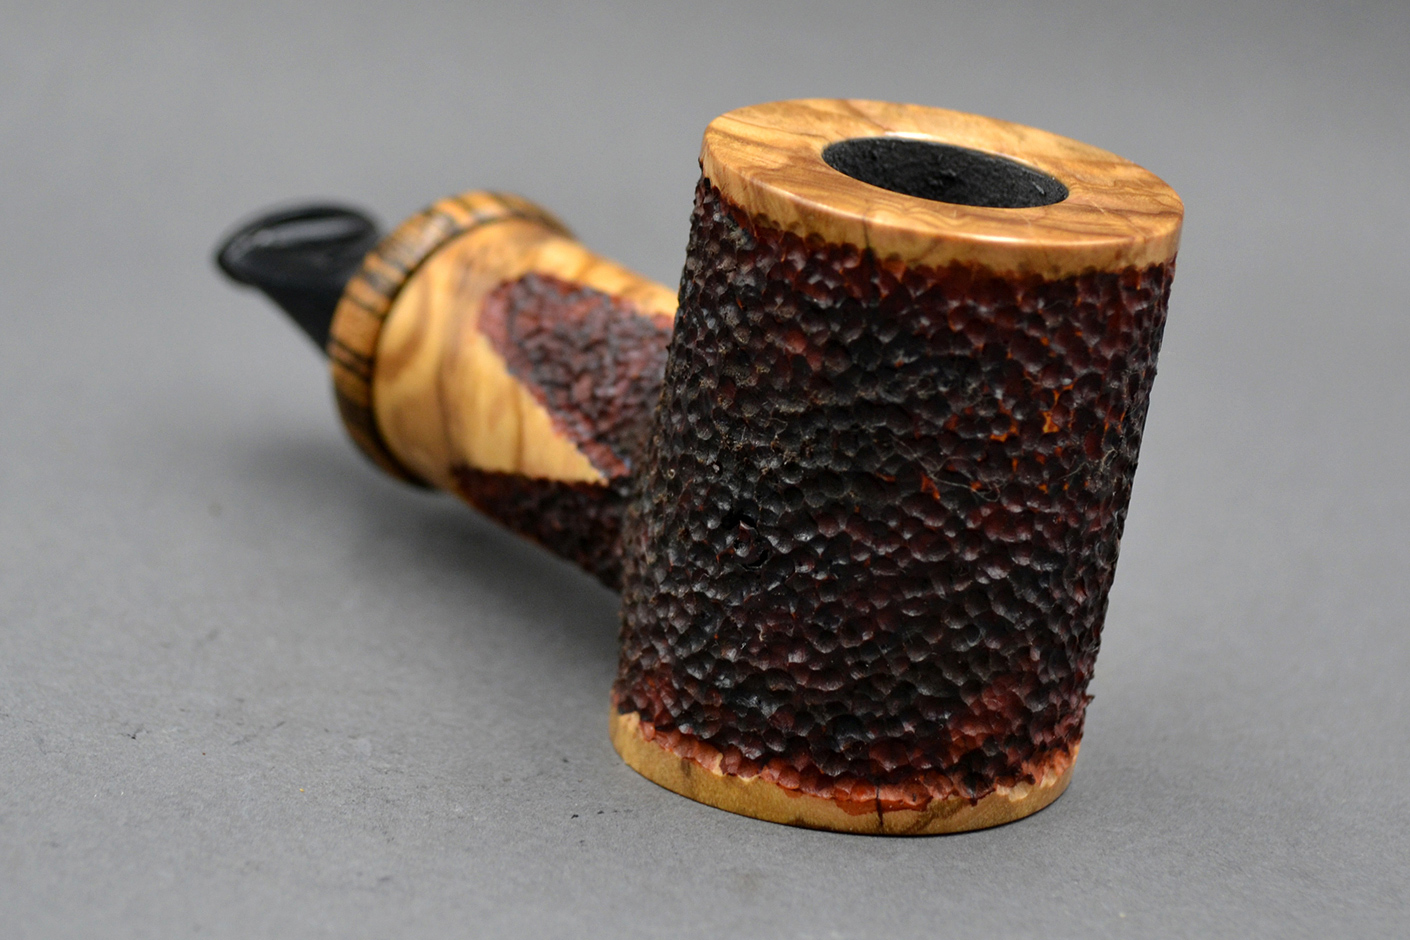 Queen 21132 – Handmade Olivewood Tobacco Pipe